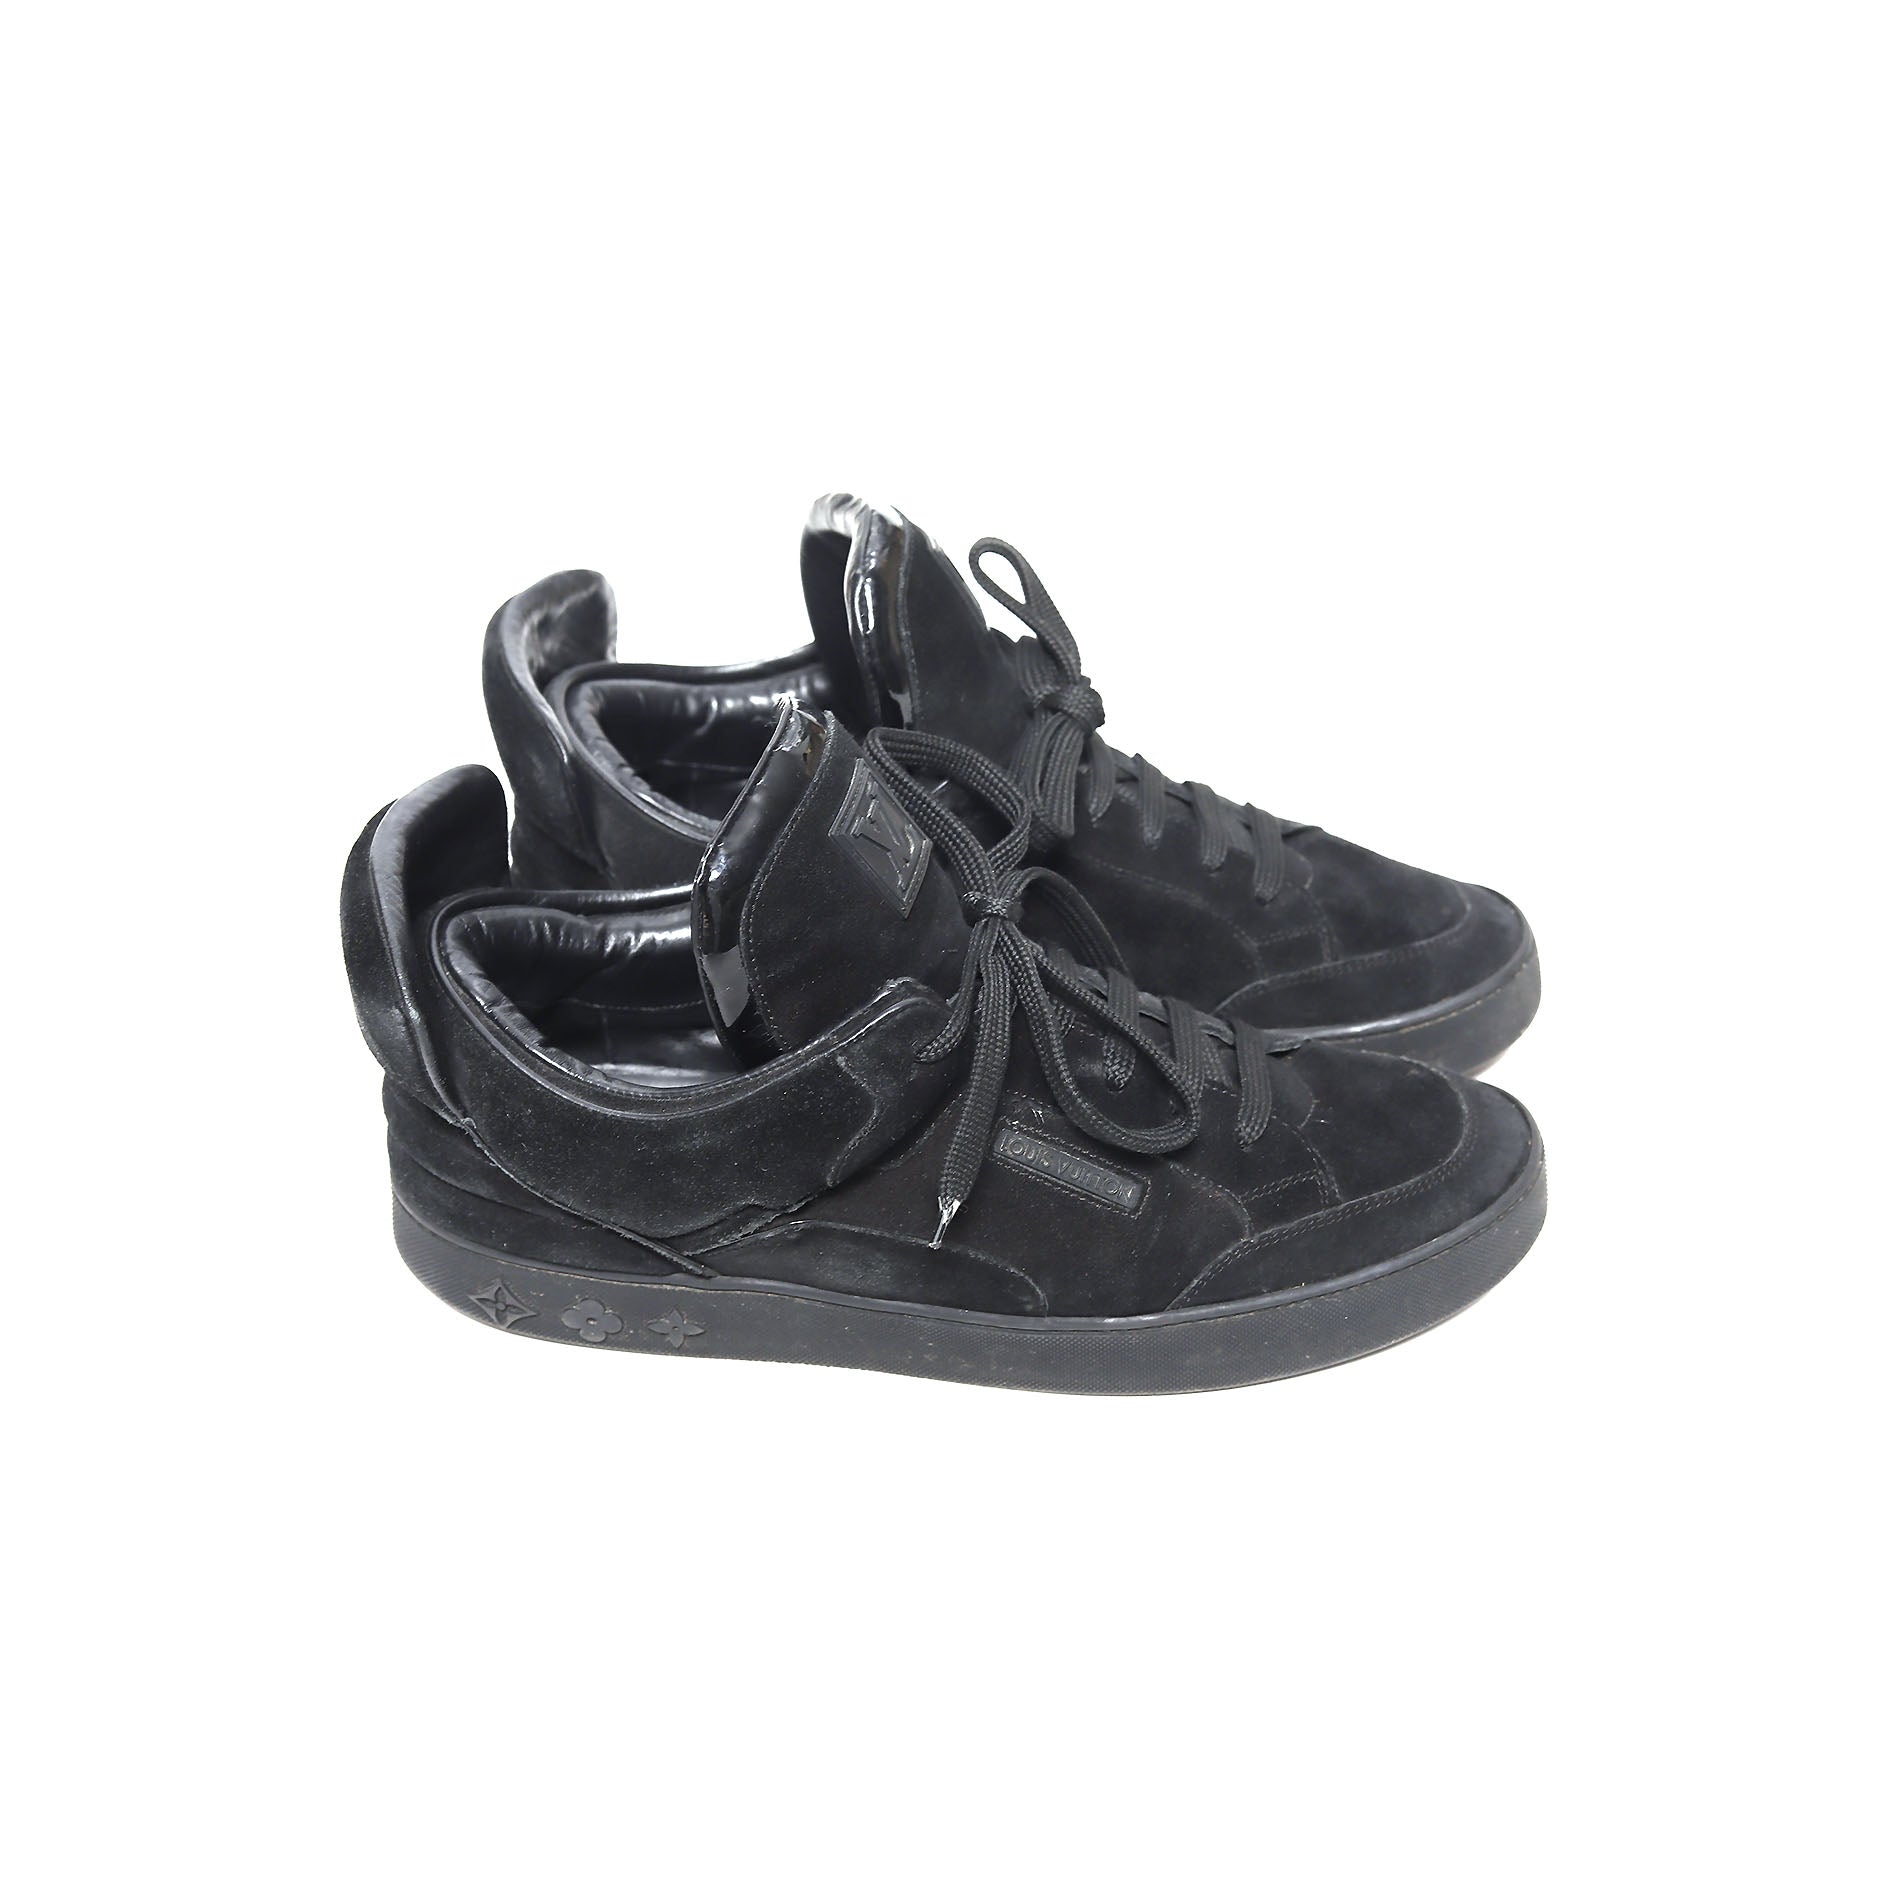 Louis Vuitton VERY RARE Kanye West x Louis Vuitton Dons in Black Suede